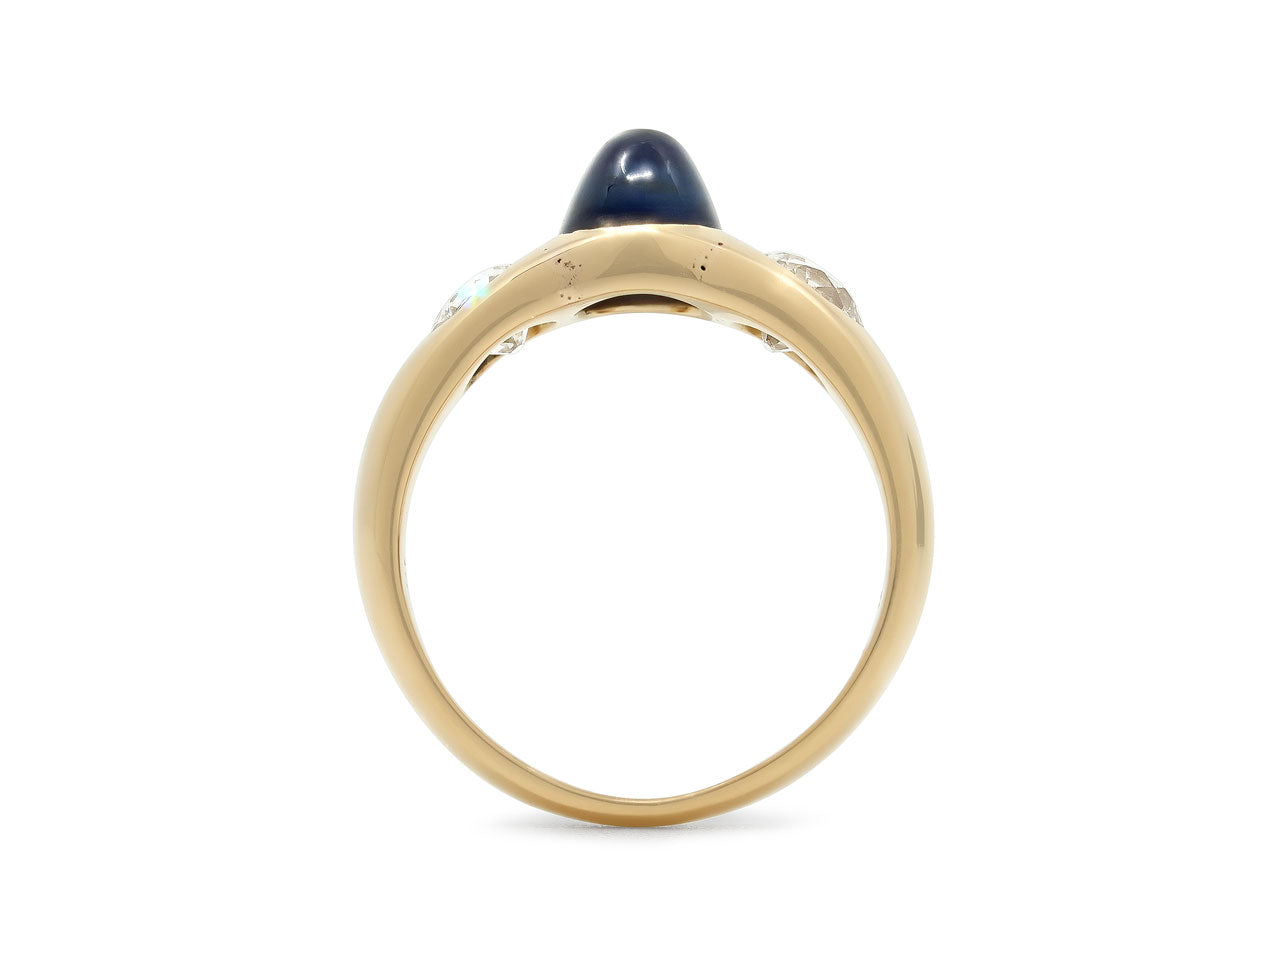 Mid-Century Cabochon Sapphire and Diamond Ring in 18K Gold